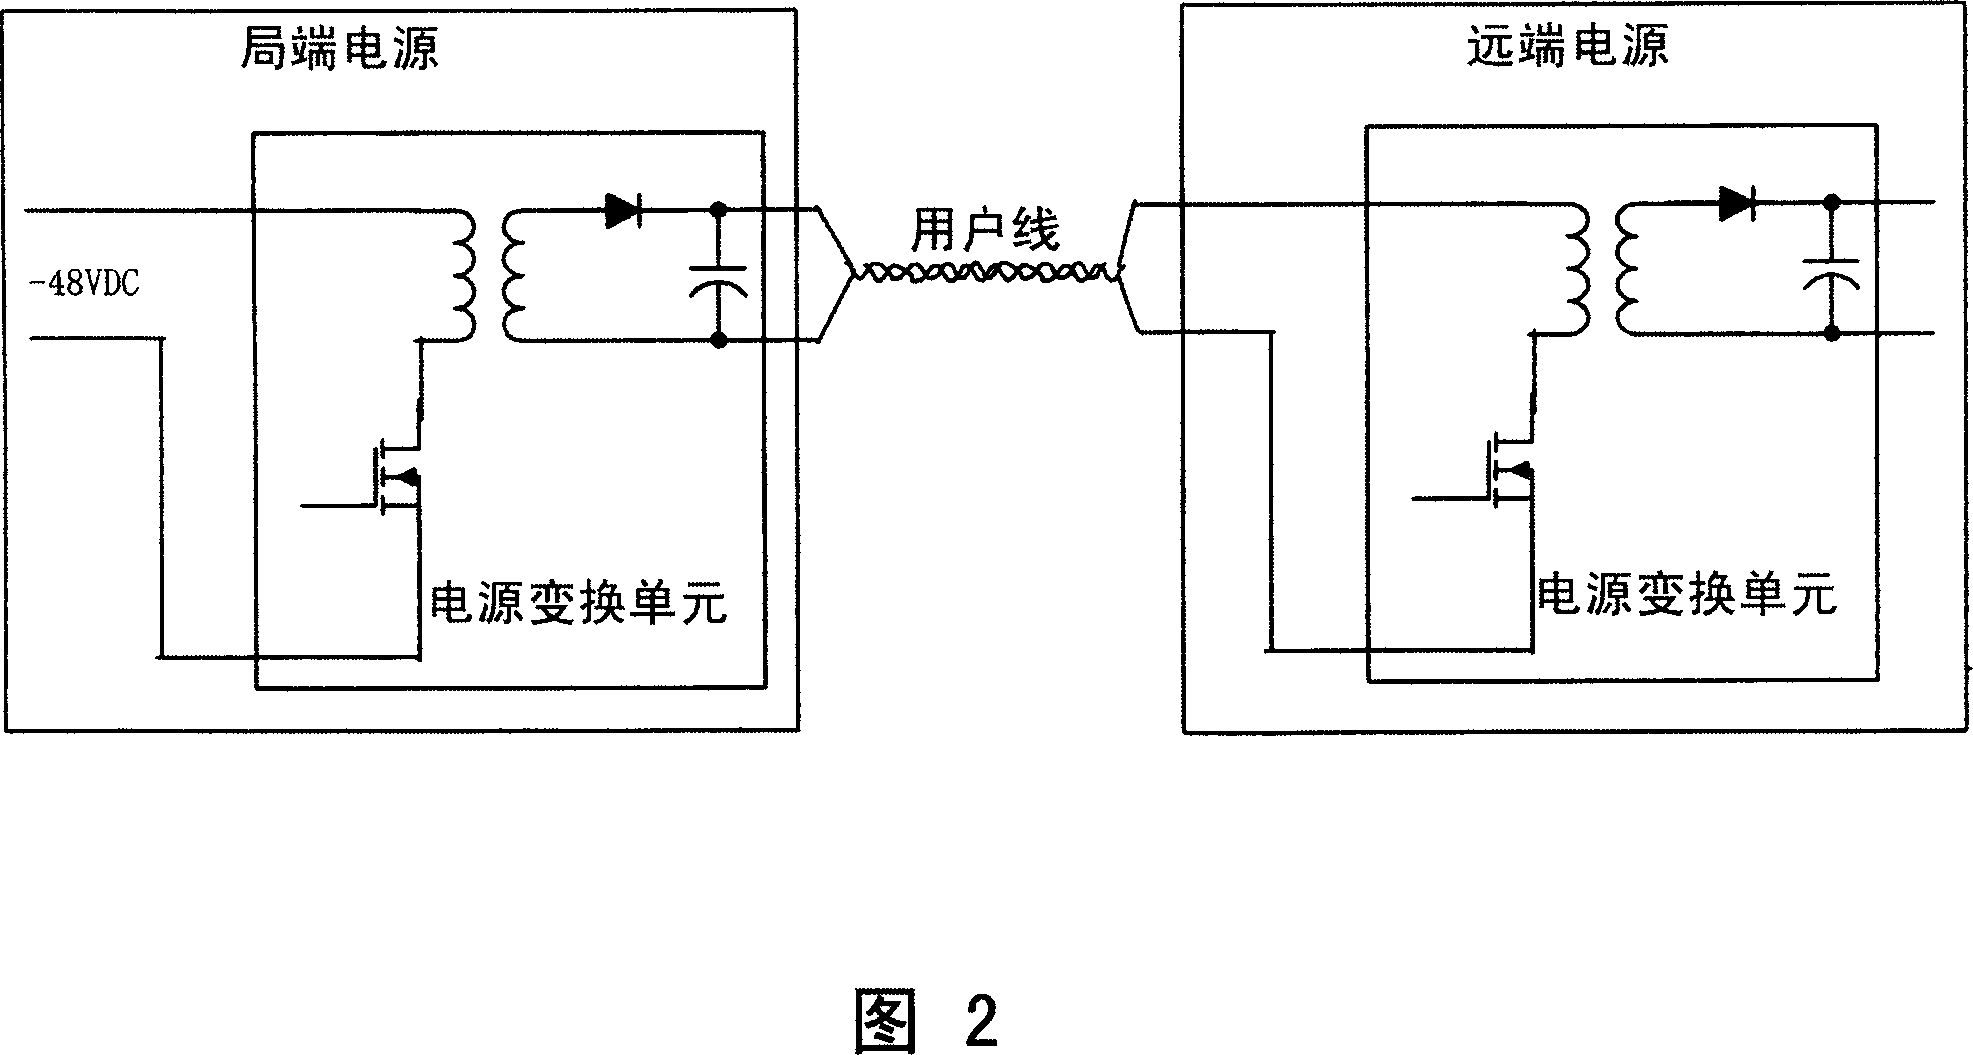 Remote power supply system, online detection method of the remote power and remote power supply method